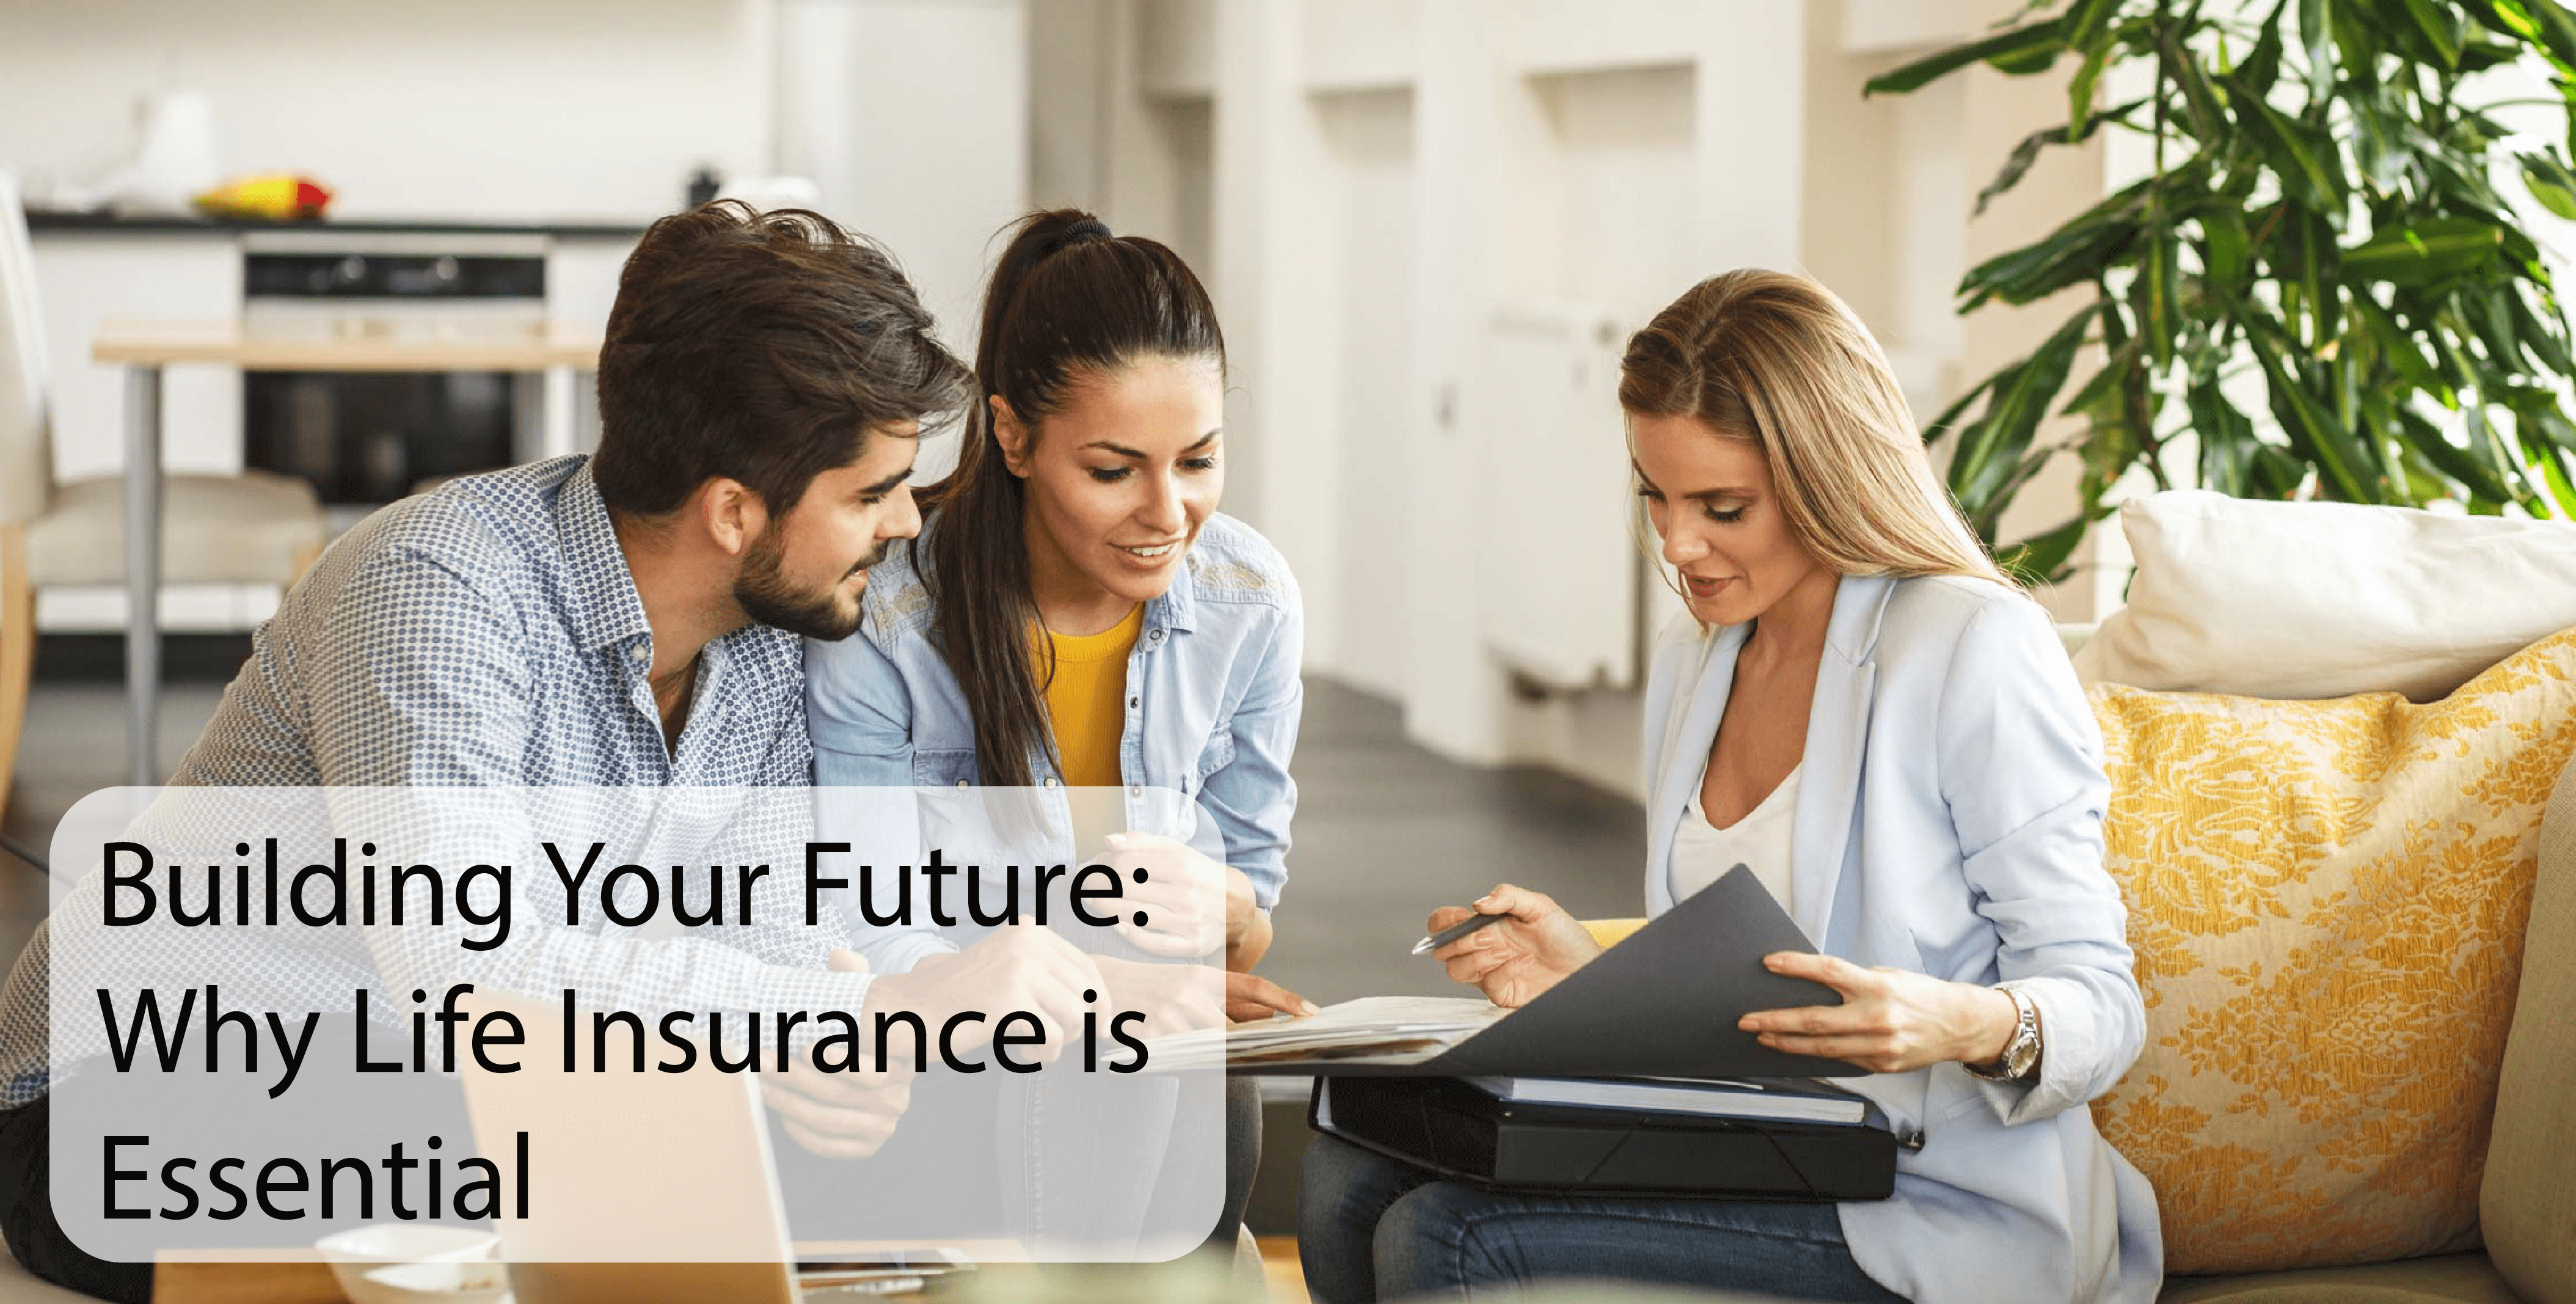 Building Your Future: Why Life Insurance is Essential